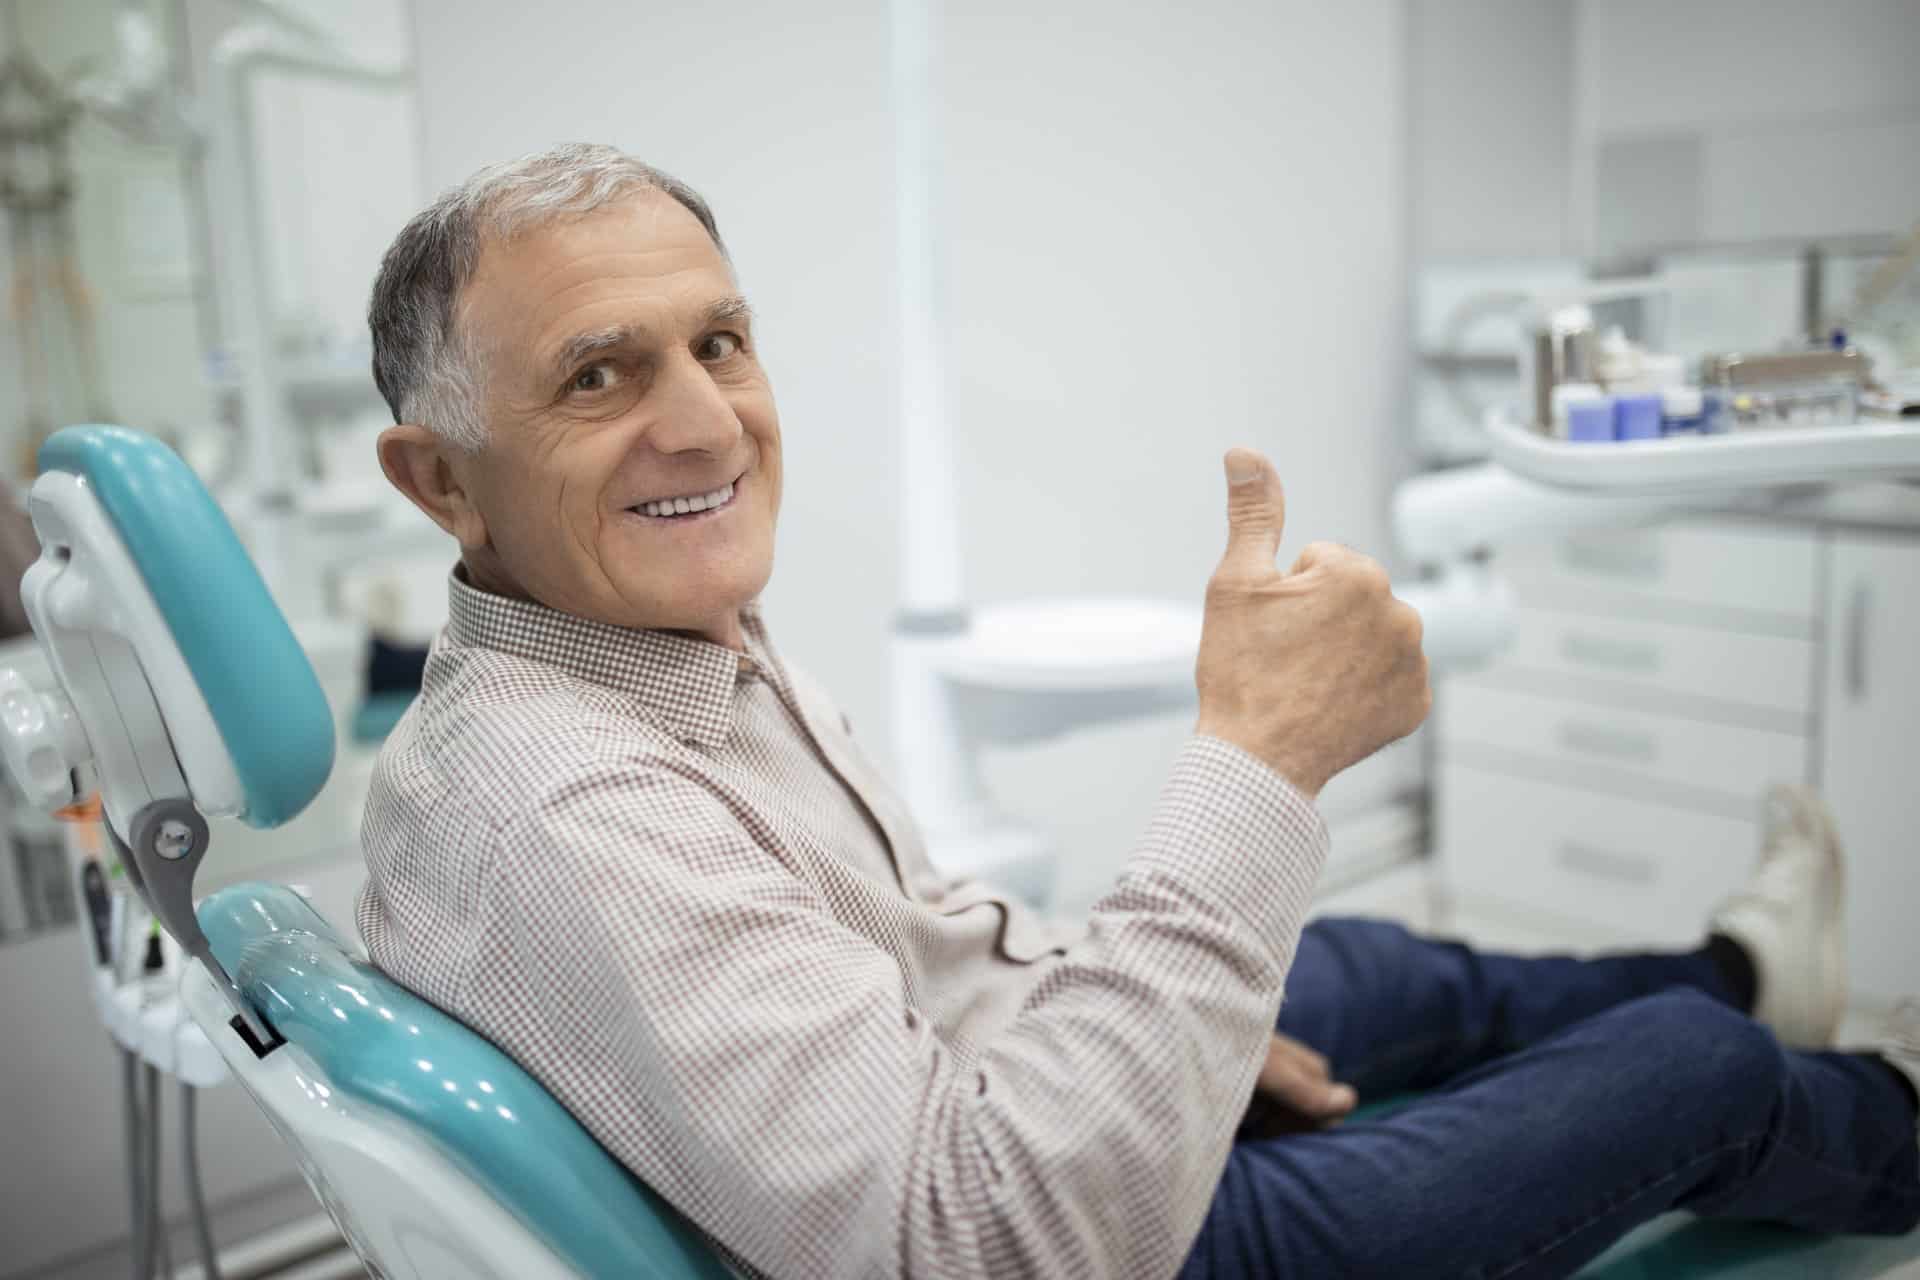 With our nitrous oxide sedation option, you'll experience a relaxed and stress-free dental visit. Say goodbye to dental anxiety and embrace a comfortable dental experience.